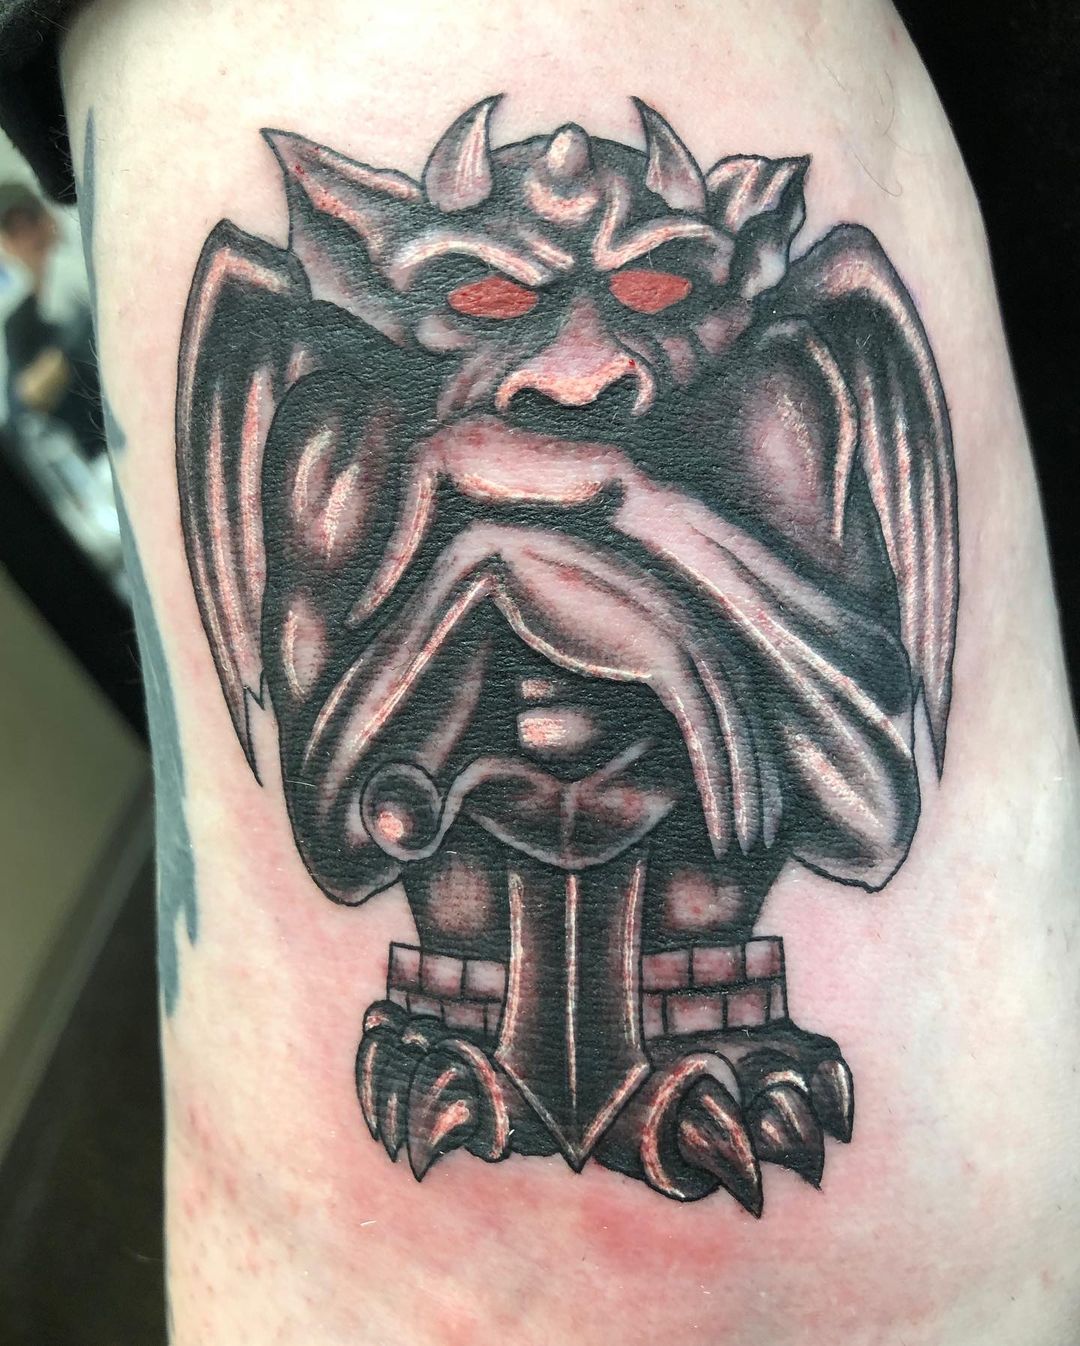 Gargoyle Tattoo, 8 hours to complete by Javier Antunez, Owner/Artist at  Tattooed Theory in Miami, FL visit www.tattooedtheo… | Gargoyle tattoo,  Gargoyles, Tattoos